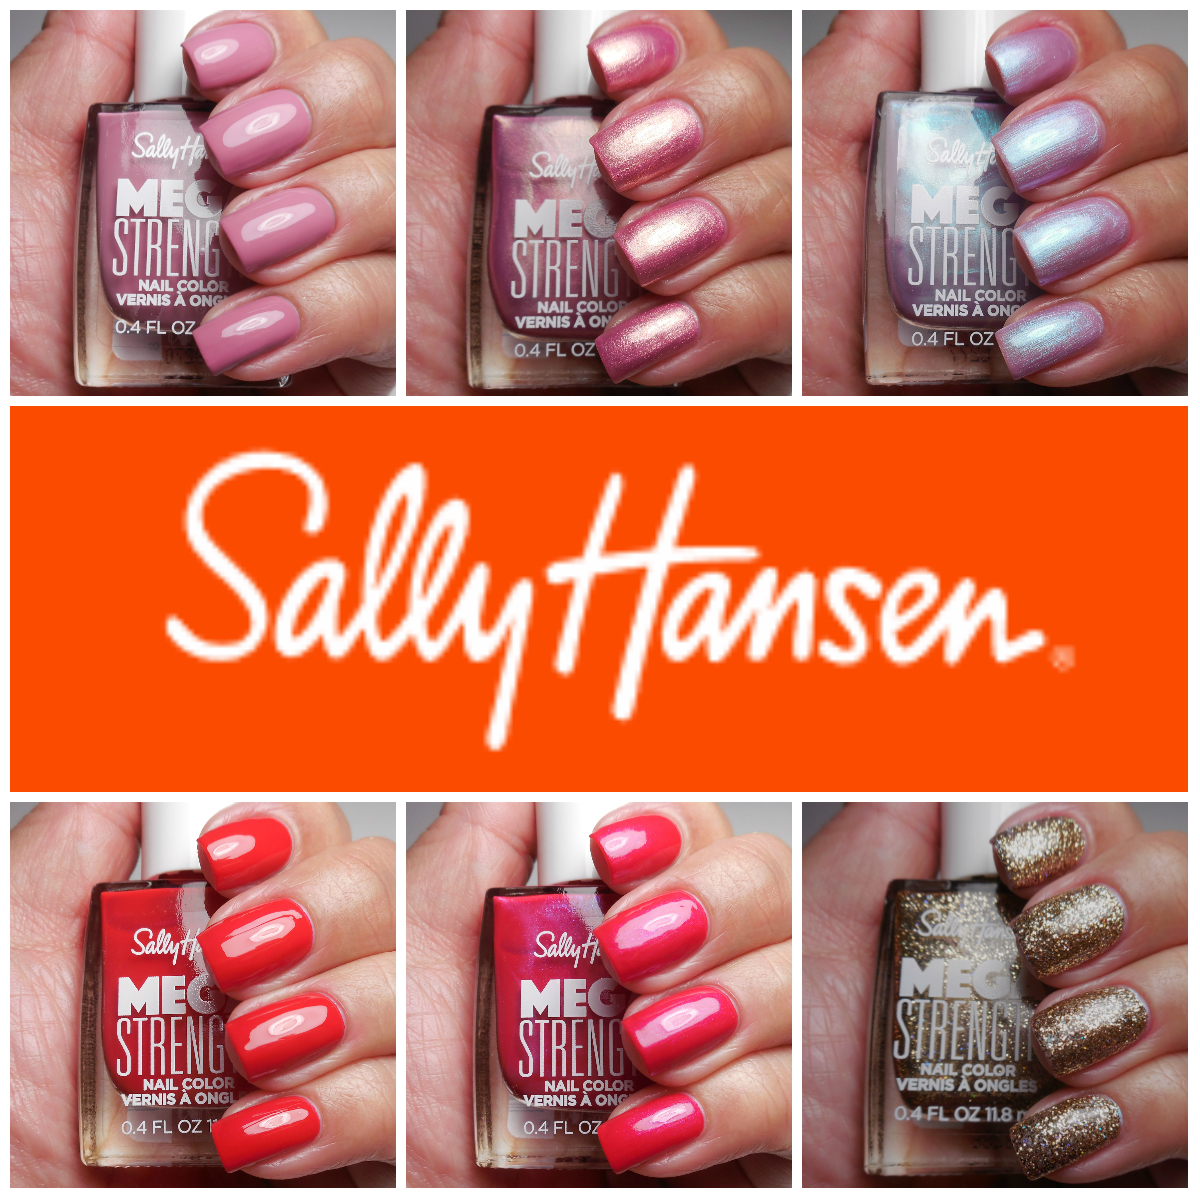 Sally Hansen Mega Strength Line - Swatches & Review